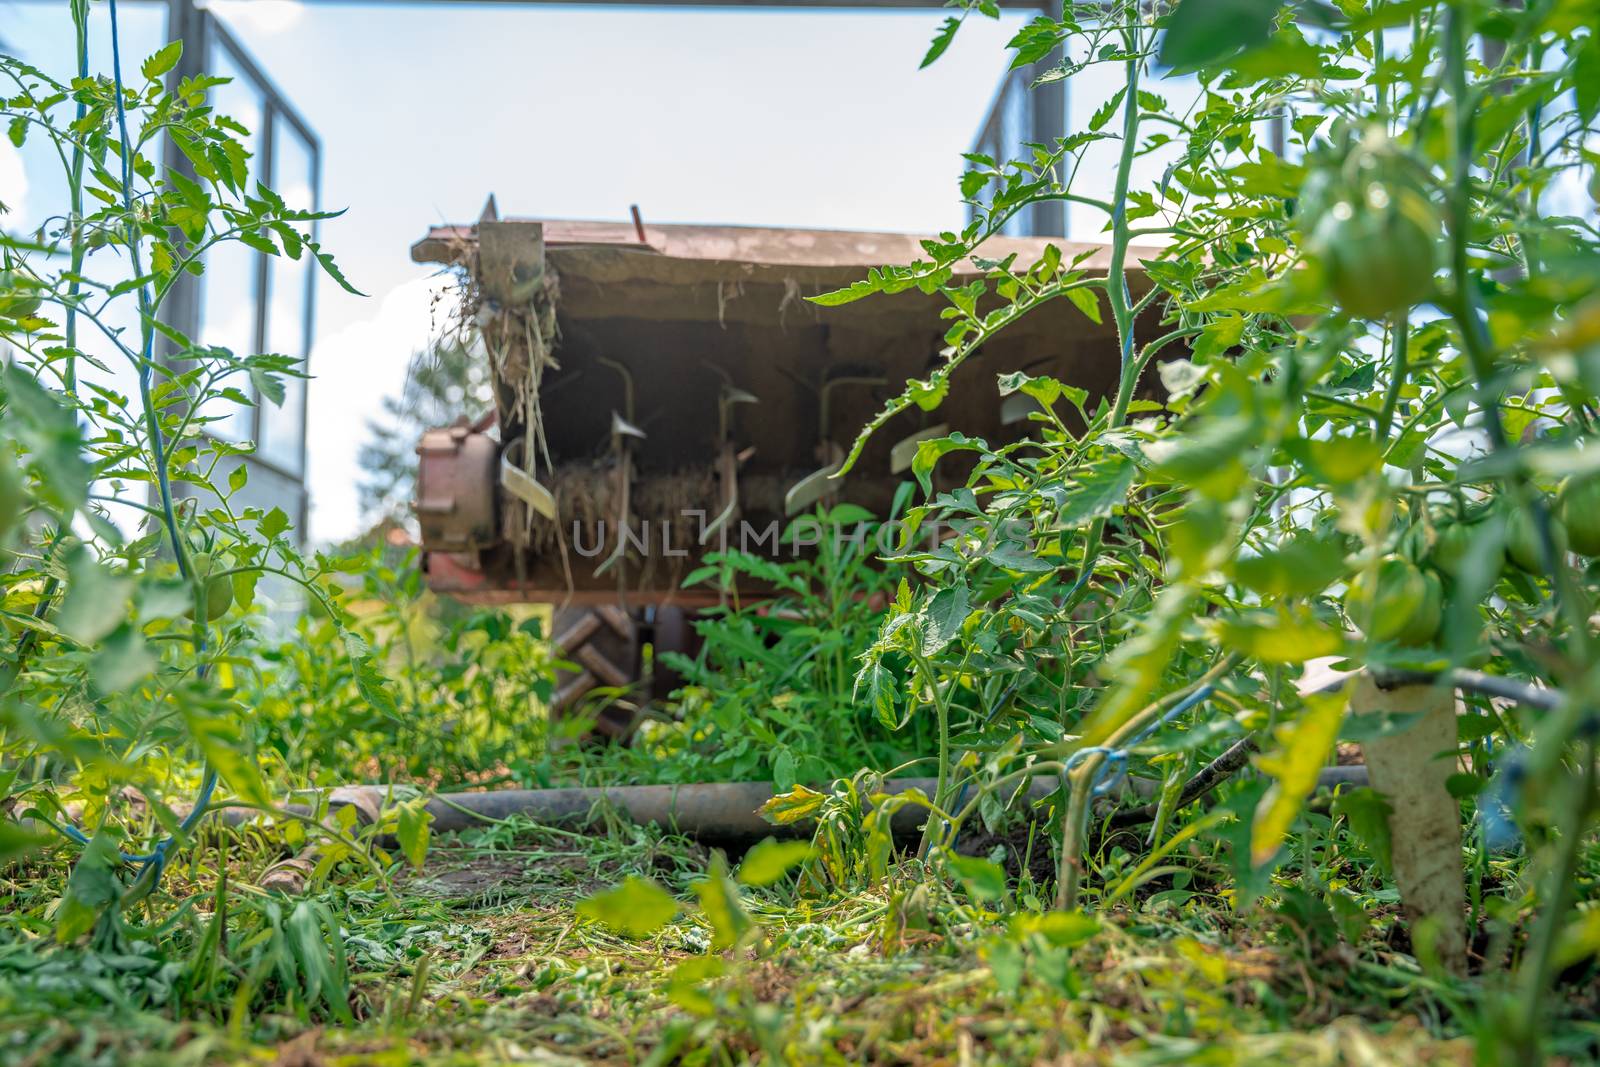 small old tractor for work in the field on an organic farm by Edophoto